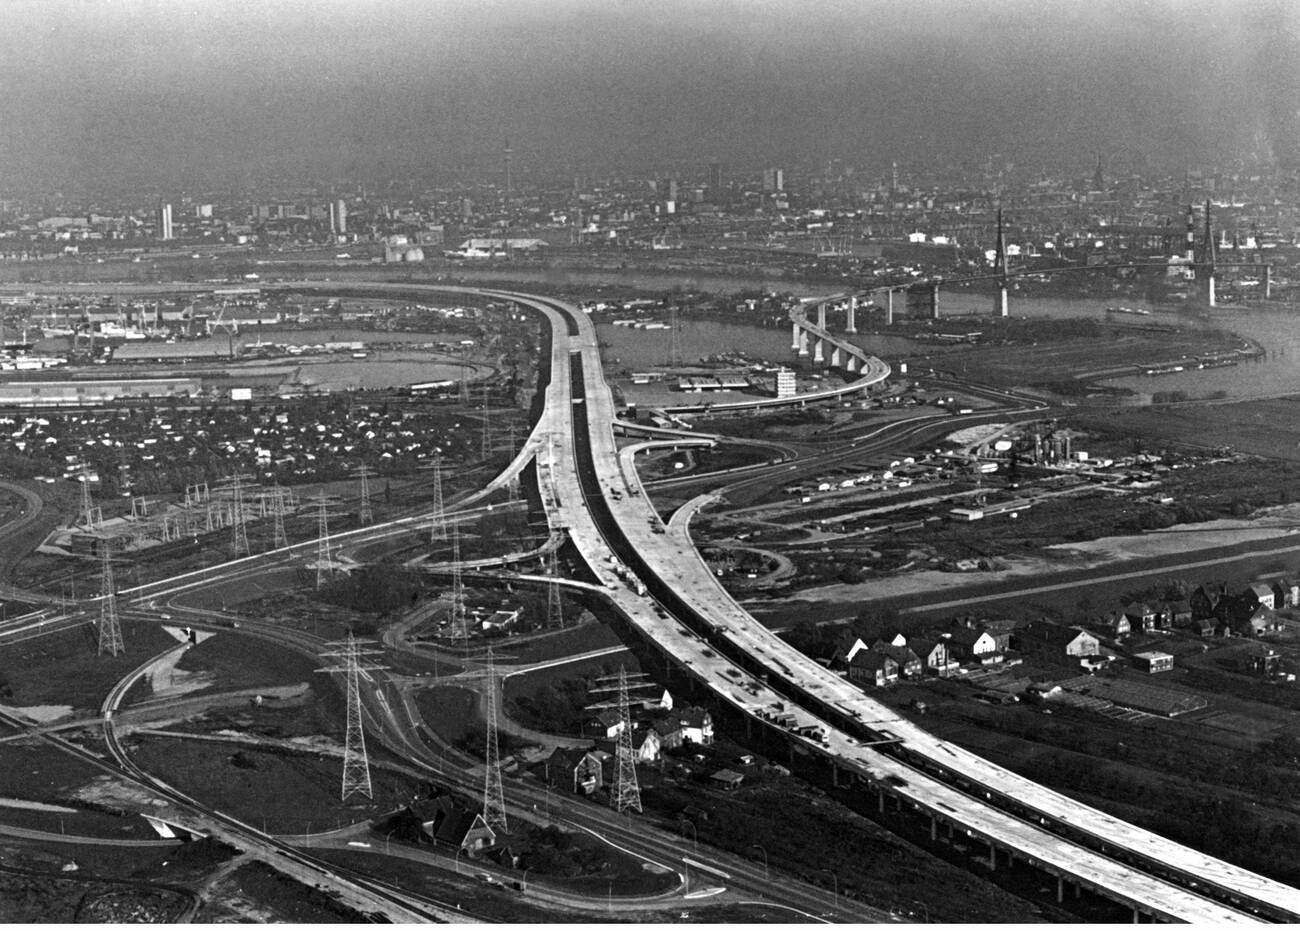 The motorway access to the New Elbe Tunnel on the south side in Waltershof, Hamburg, Germany in 1975, viewed from the street A7 in the 1980s.